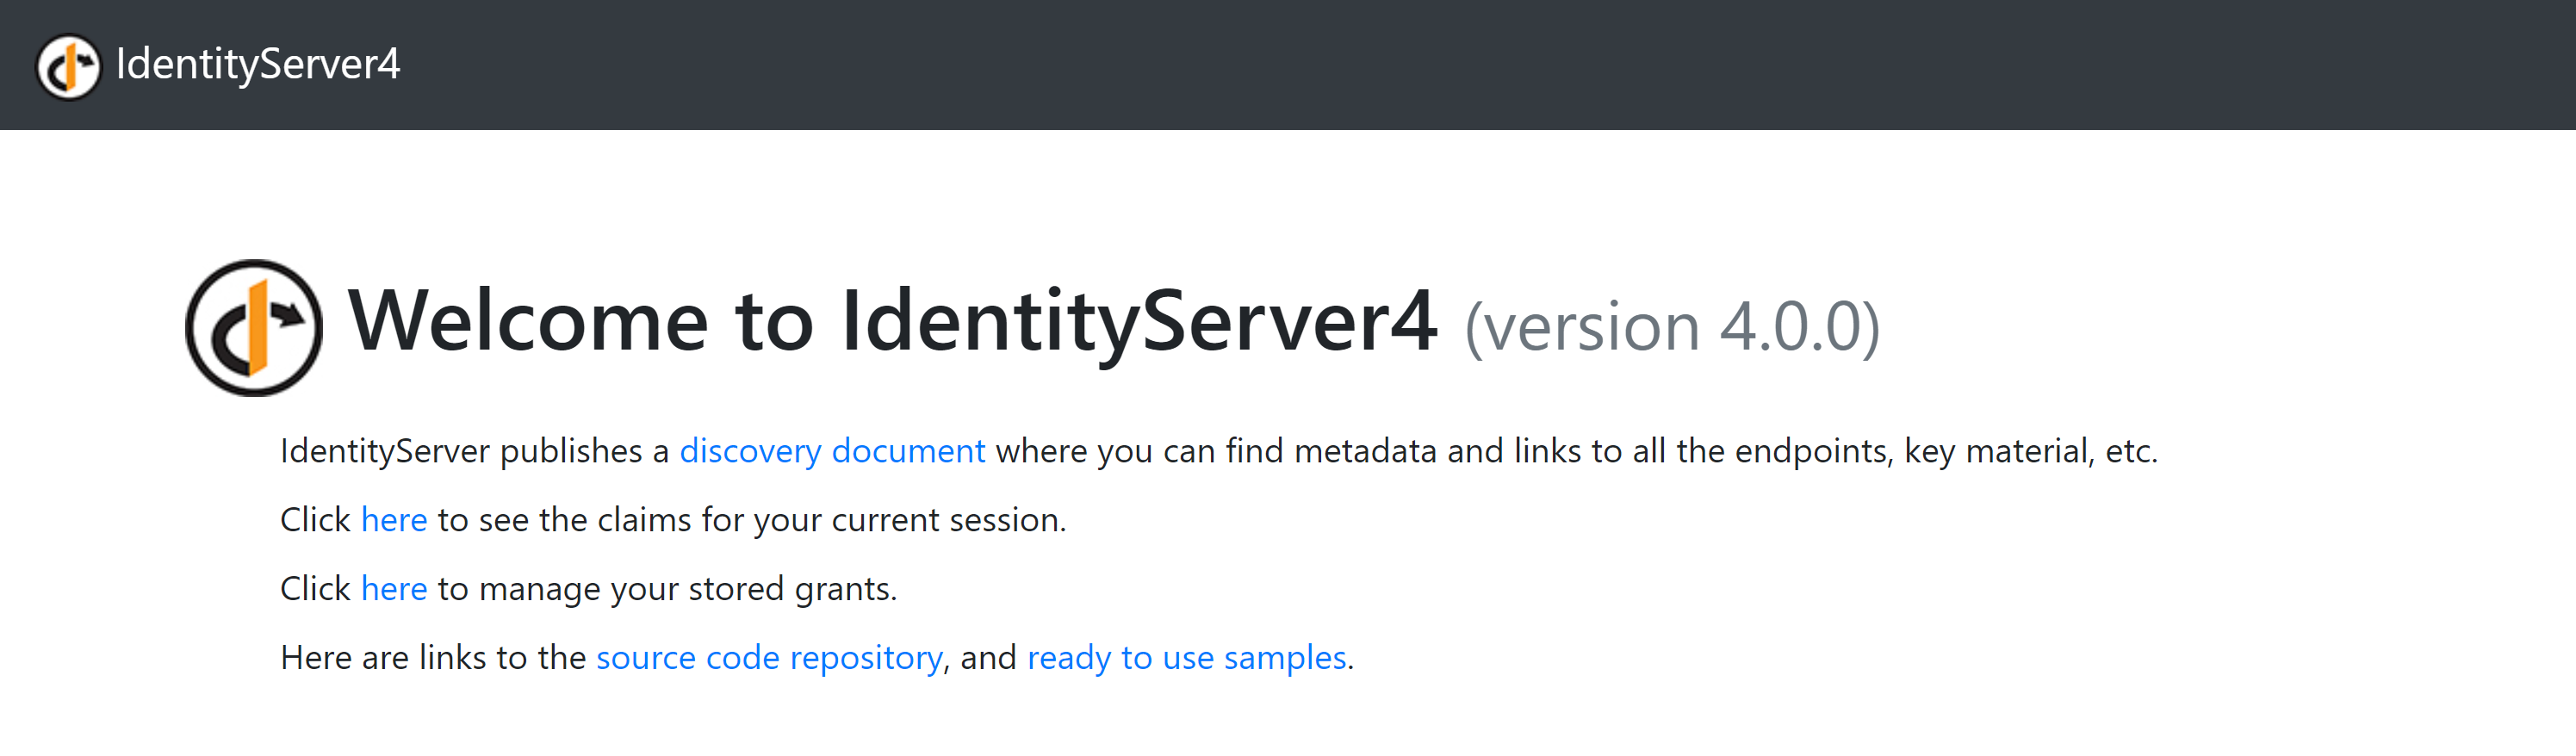 The IdentityServer4 QuickStart UI splash screen showing a welcome message and some links to help pages